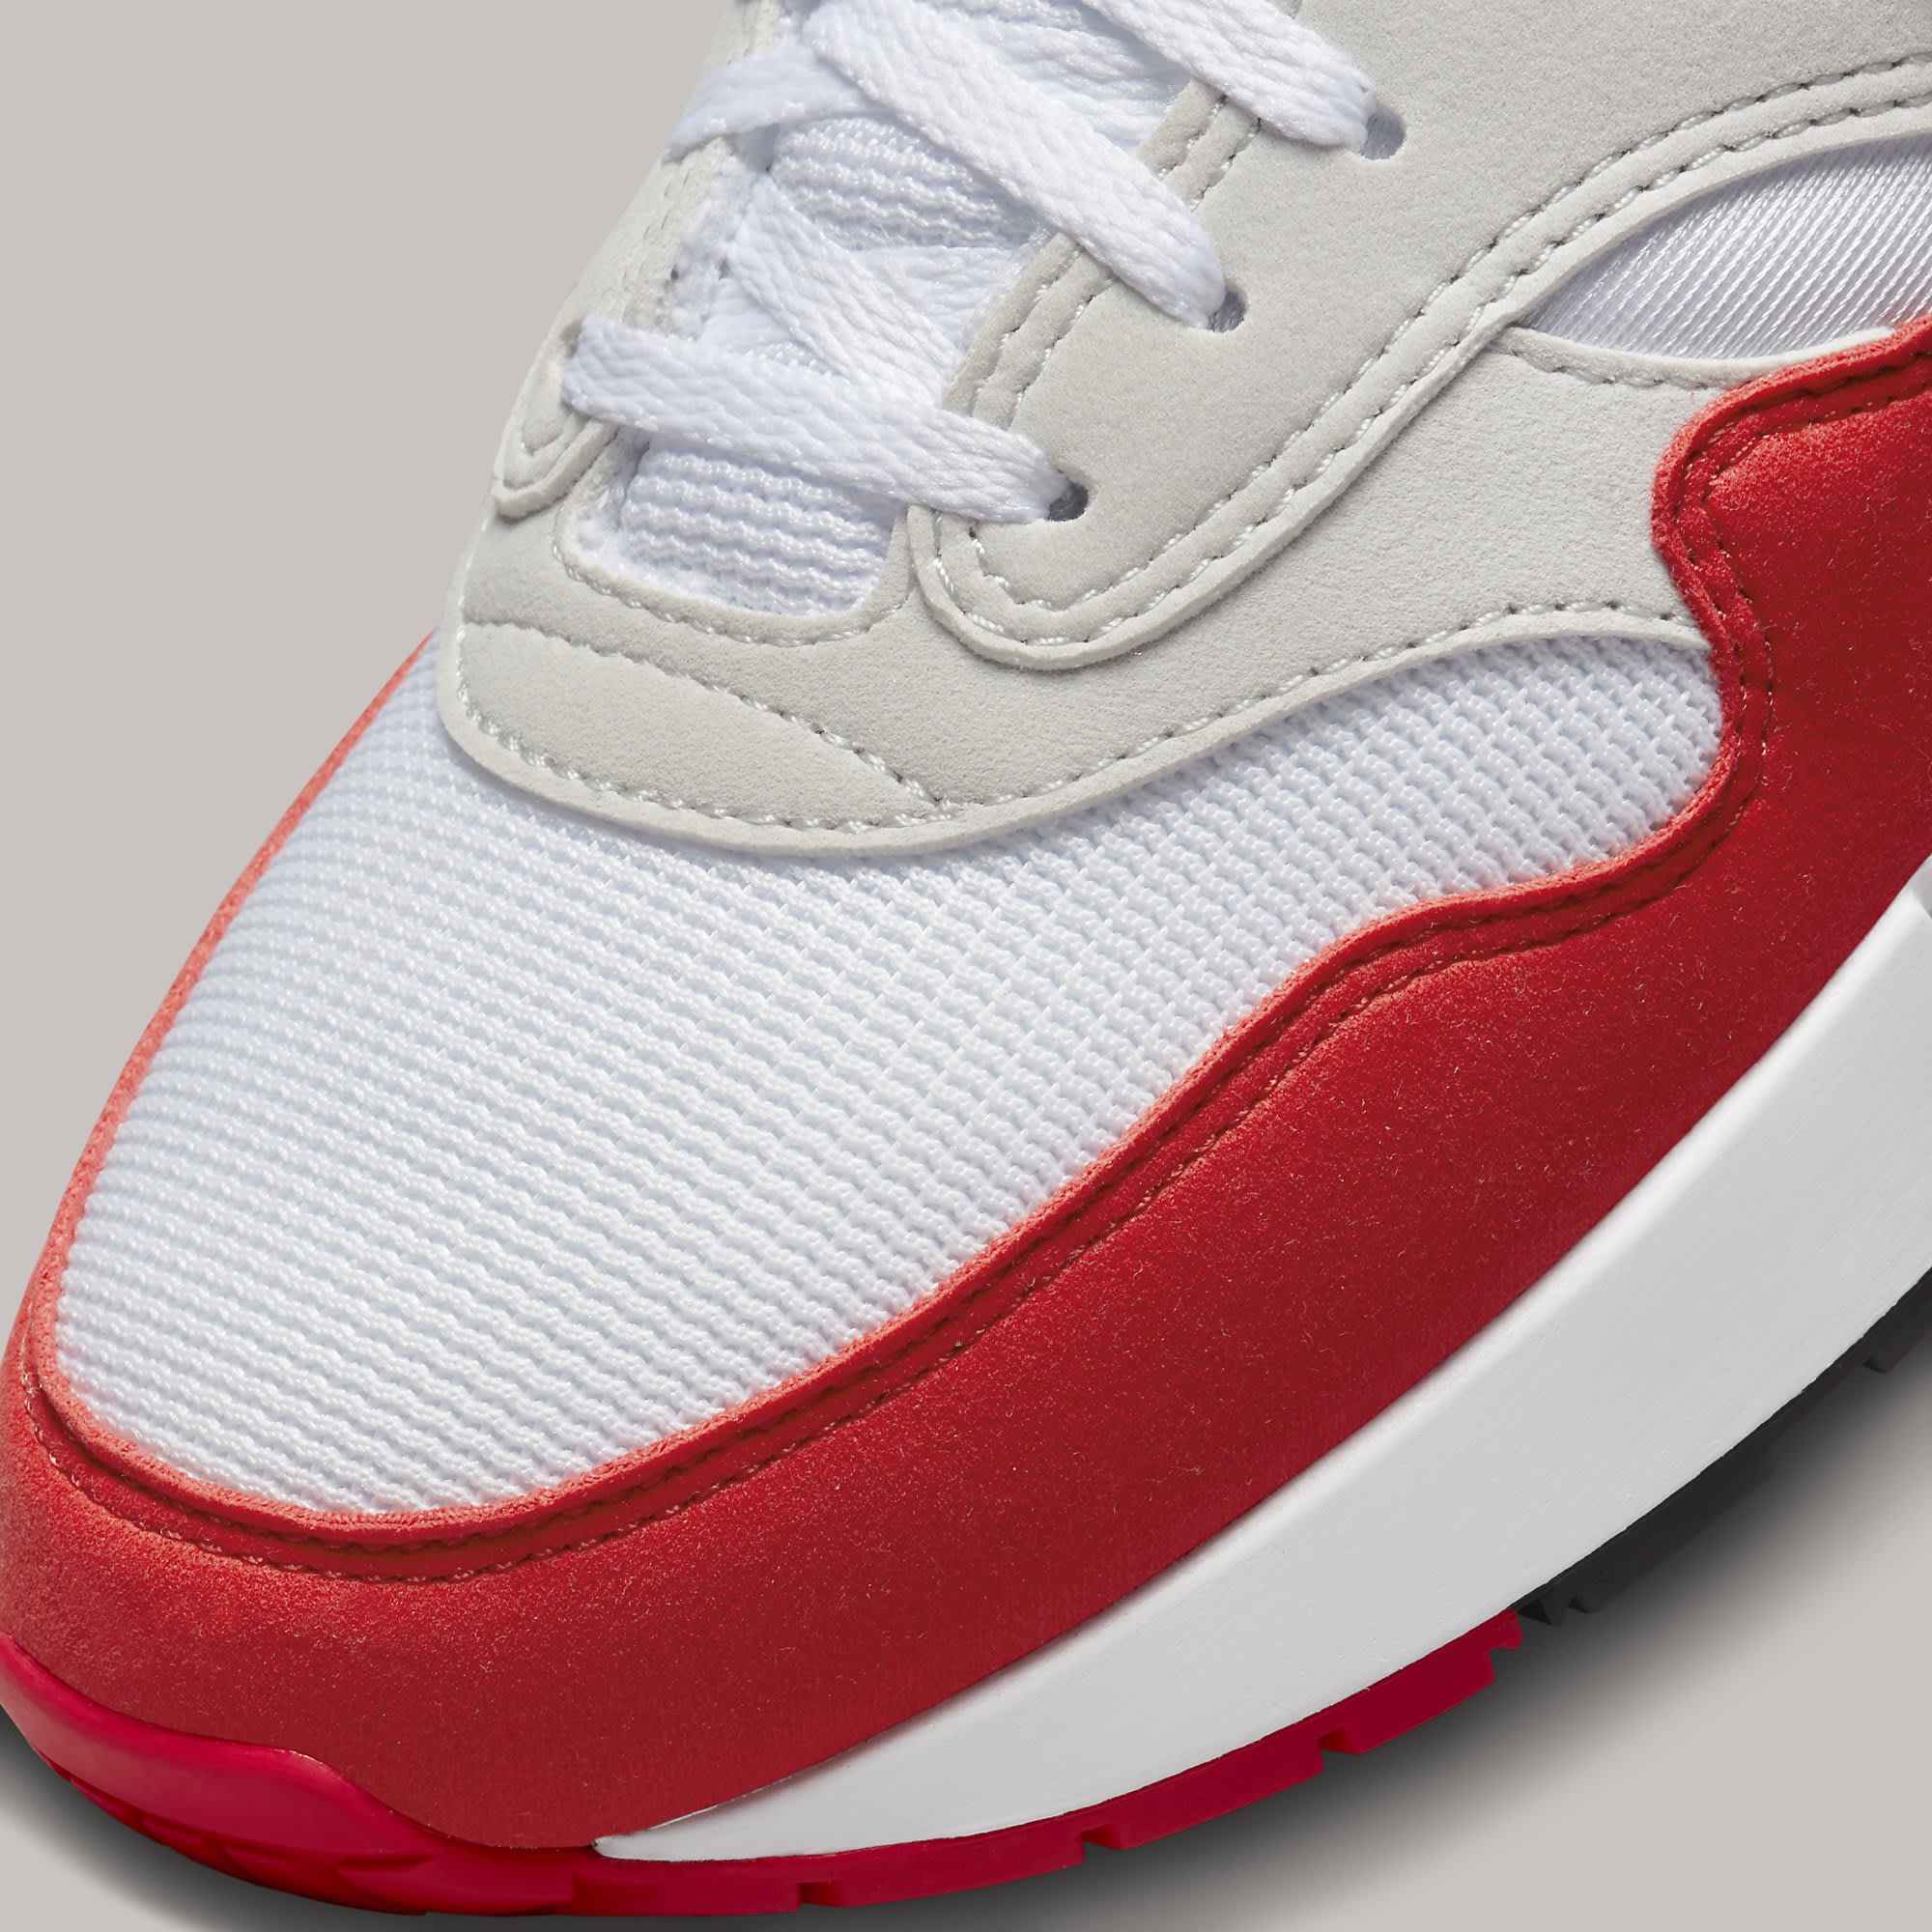 Nike Air Max 1 '86 'Big Bubble' March 2023 Sneaker Release Date